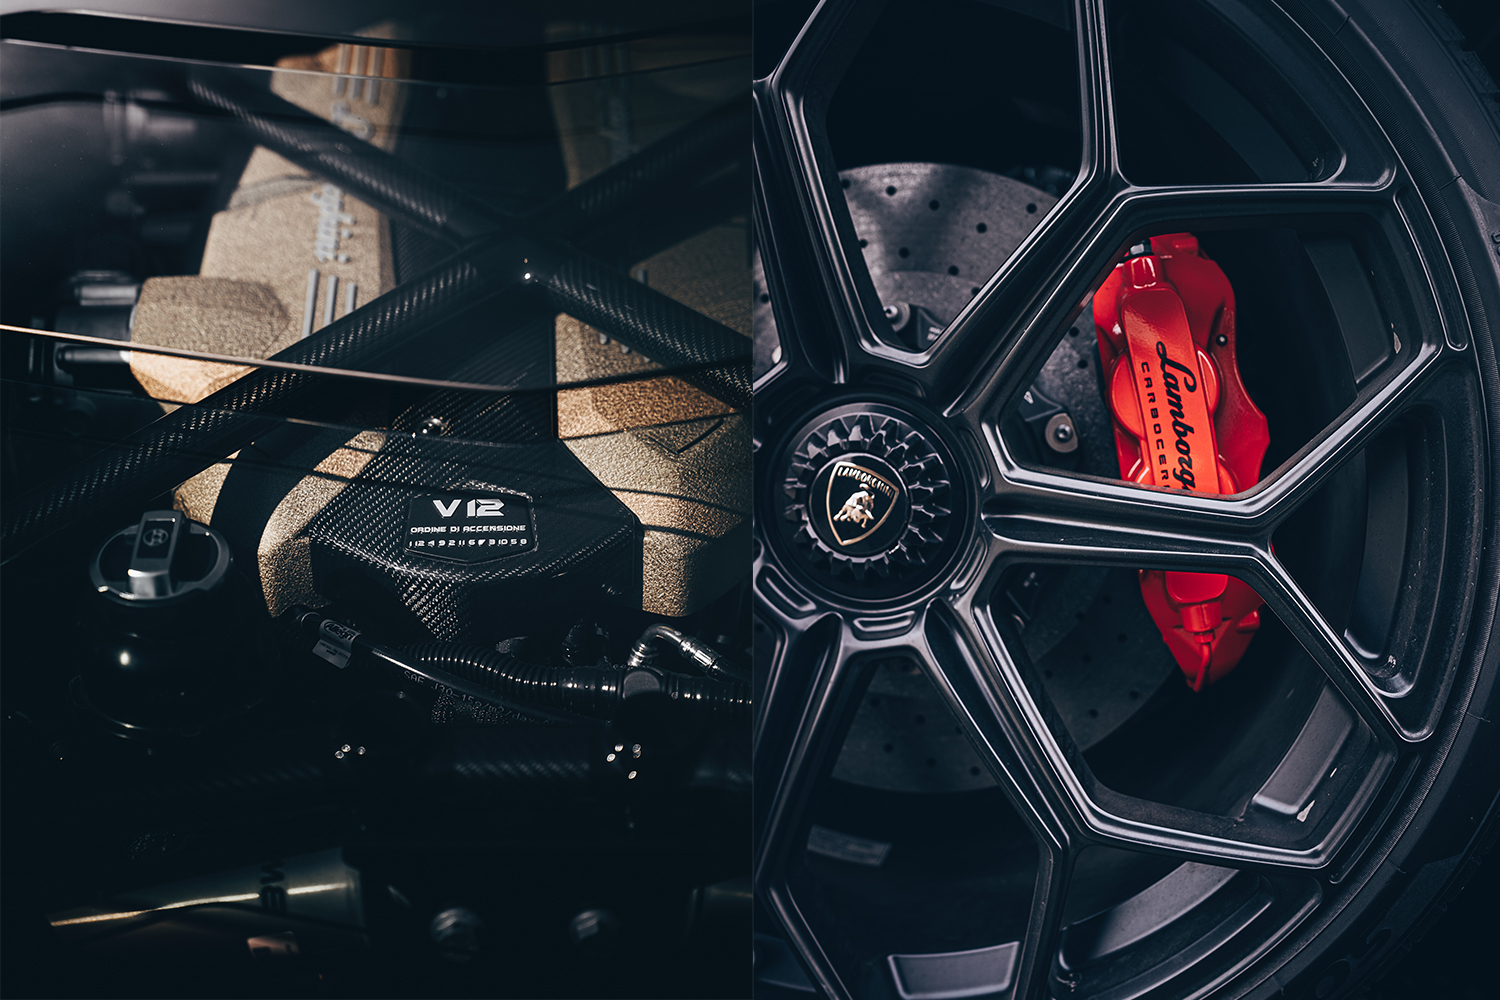 On the left is a look at the V12 engine inside the Lamborghini Aventador Ultimae. On the right is a wheel with the accented brake.